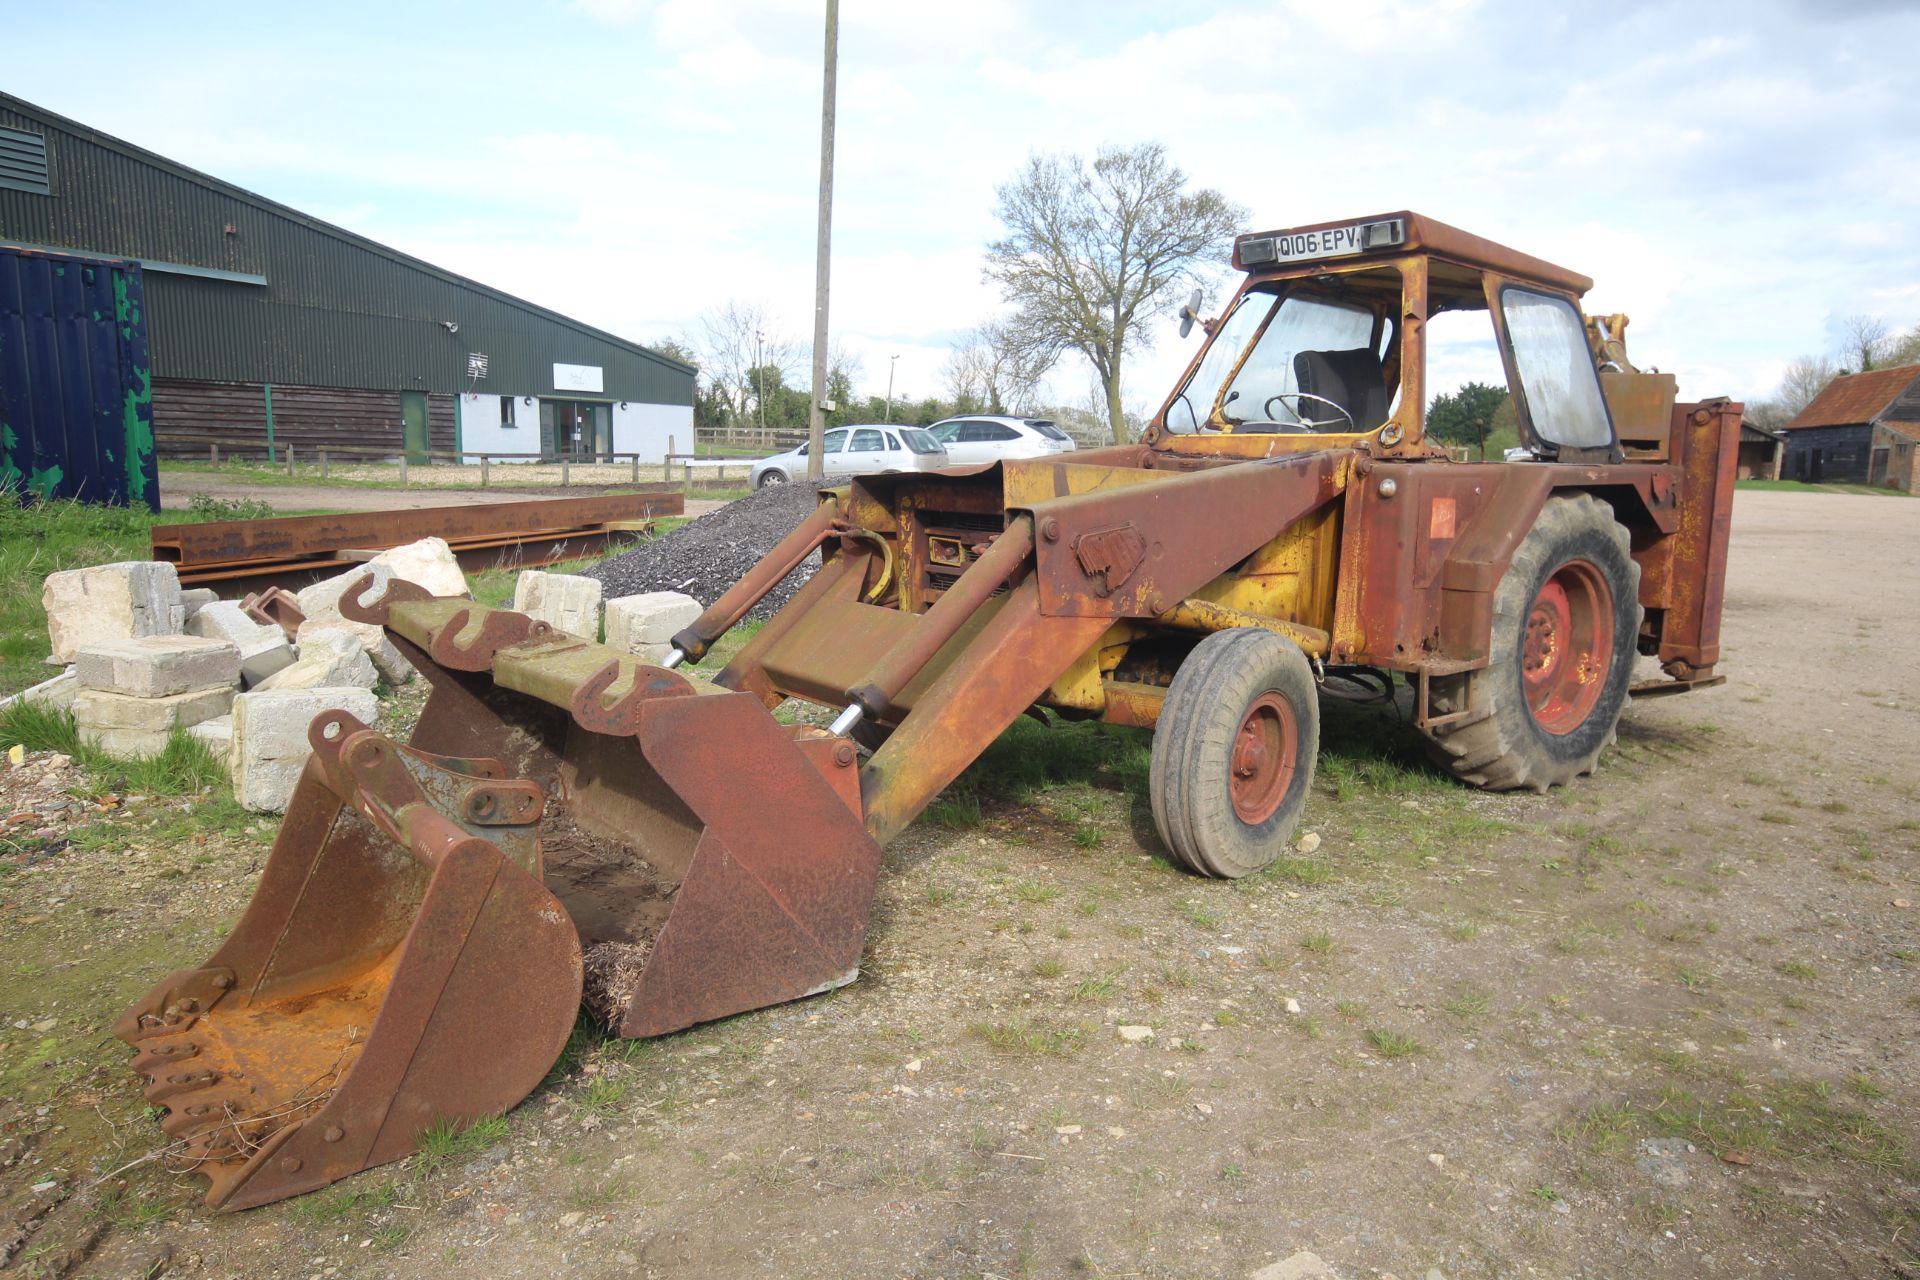 JCB 3C II 2WD backhoe loader. Registration Q106 EPV. With two rear buckets. Vendor reports that